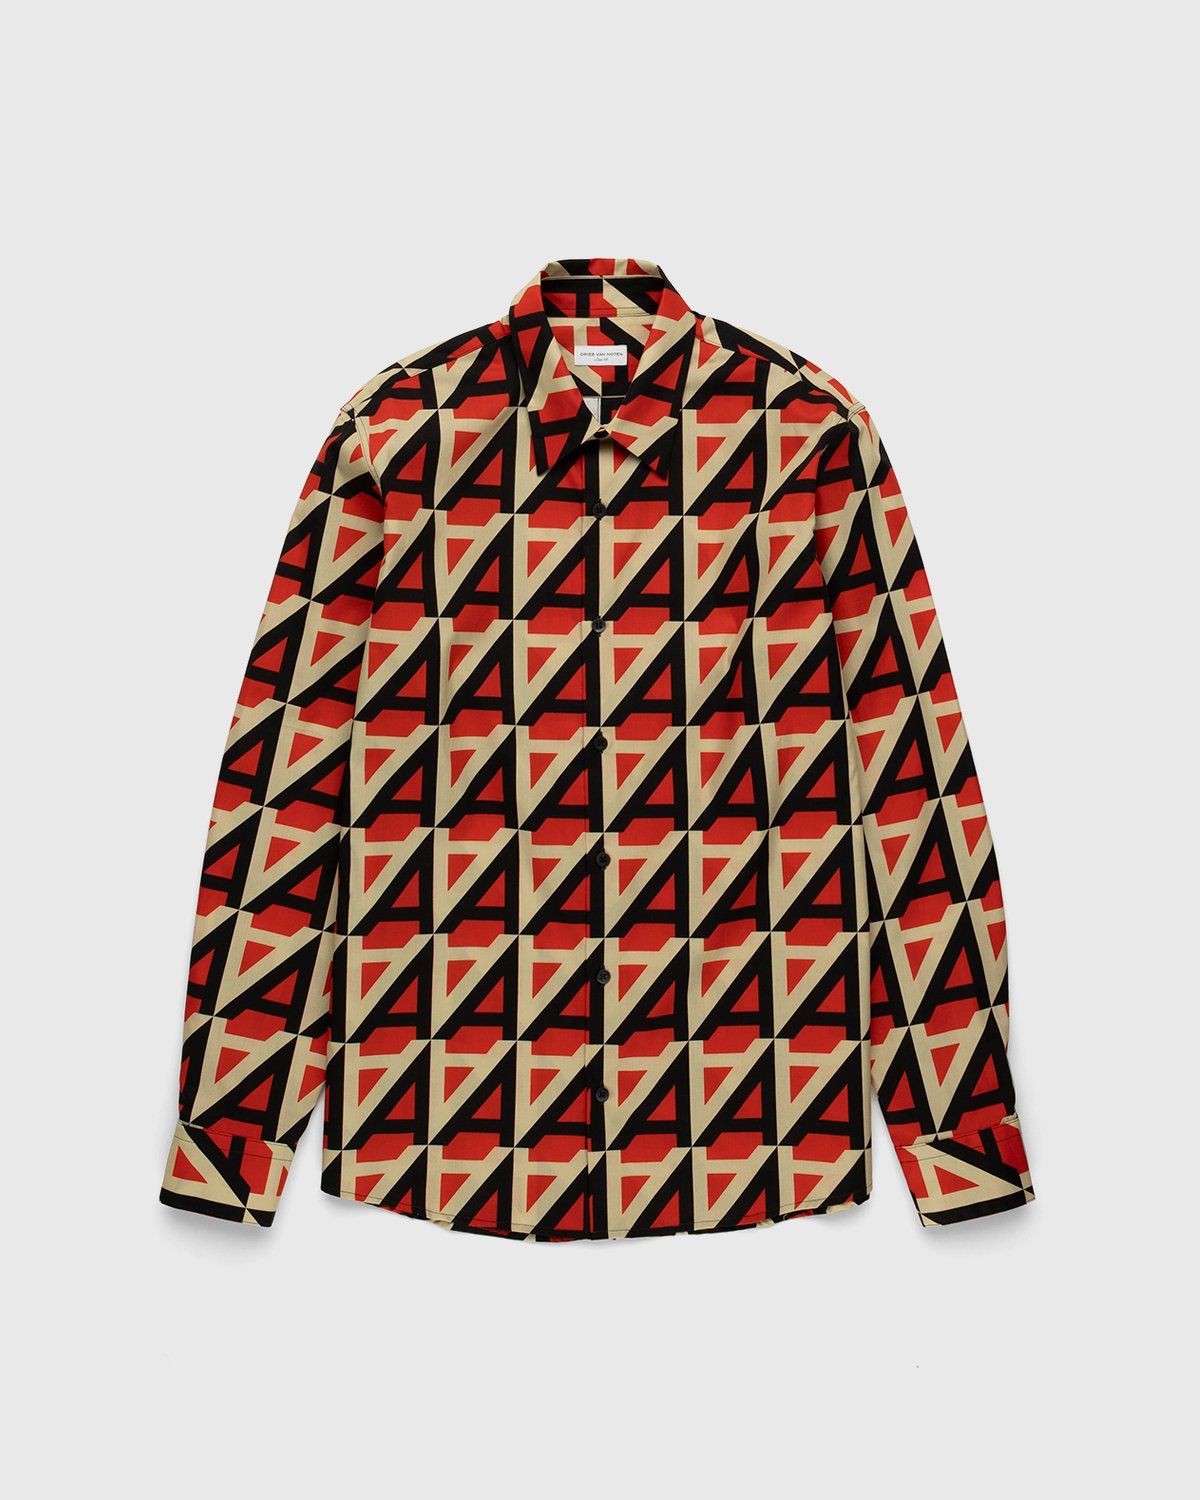 Dries van Noten – Curle "A" Shirt Red - Longsleeve Shirts - Red - Image 1